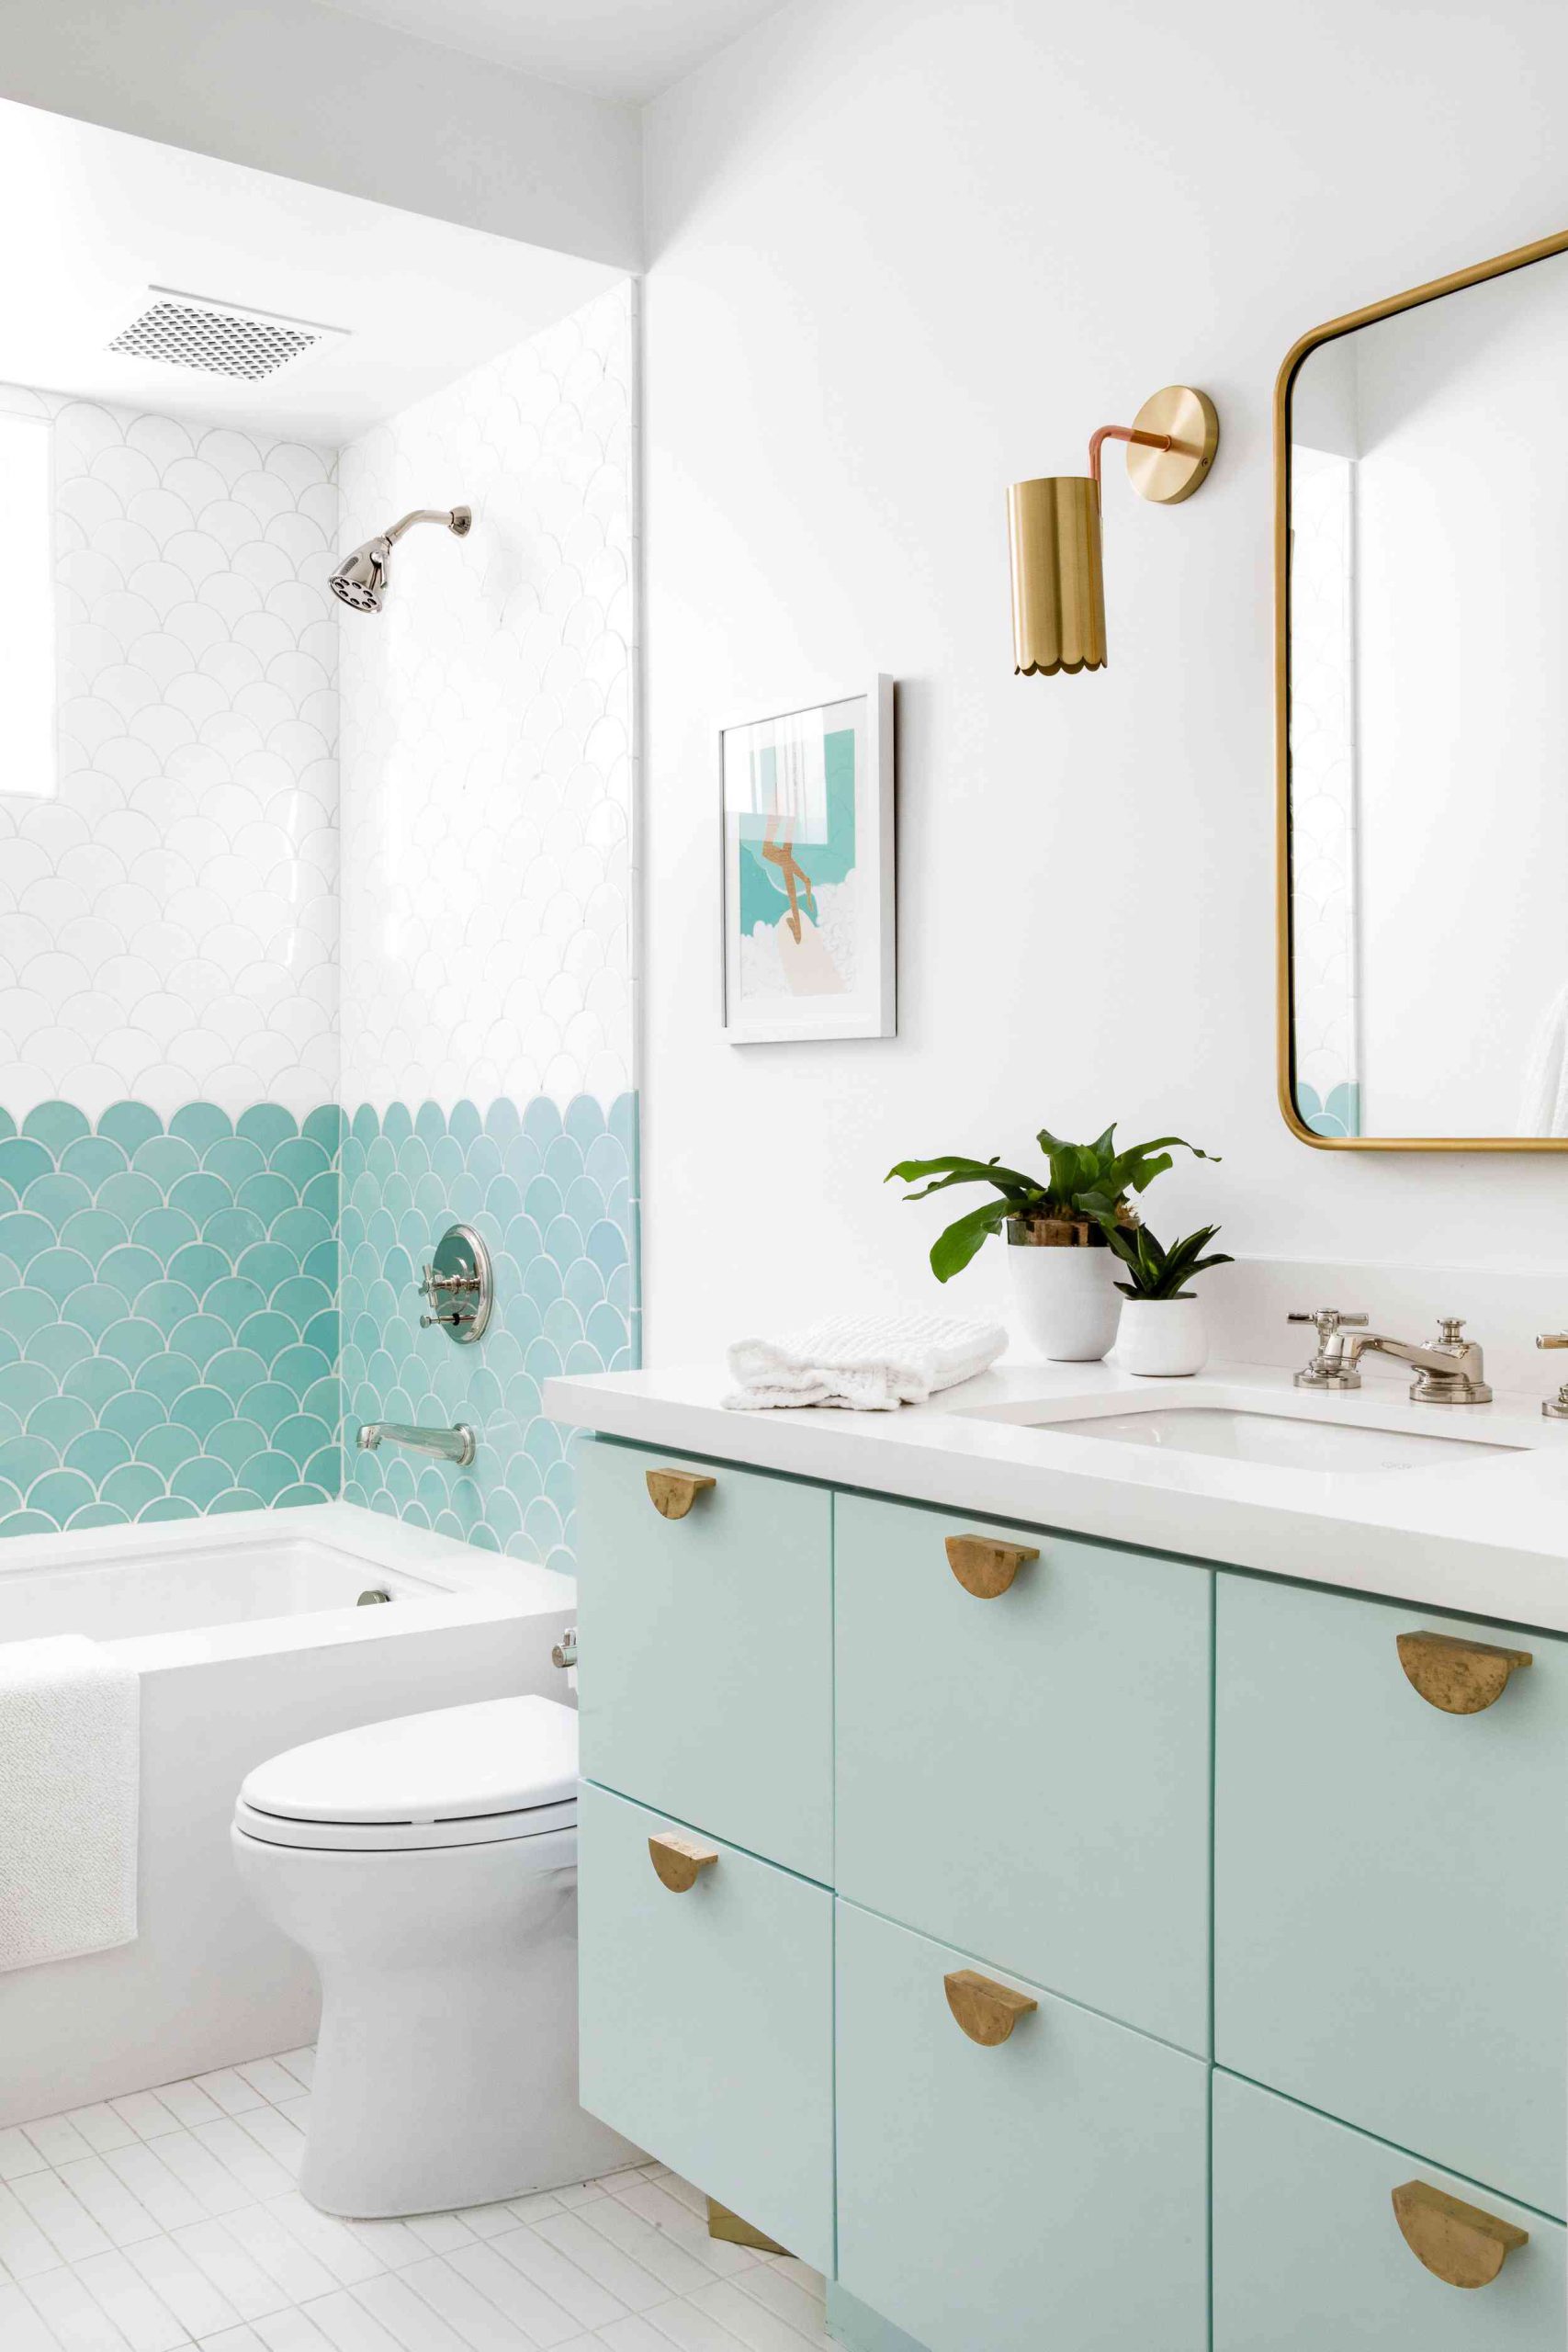 Use Mint Green Tile